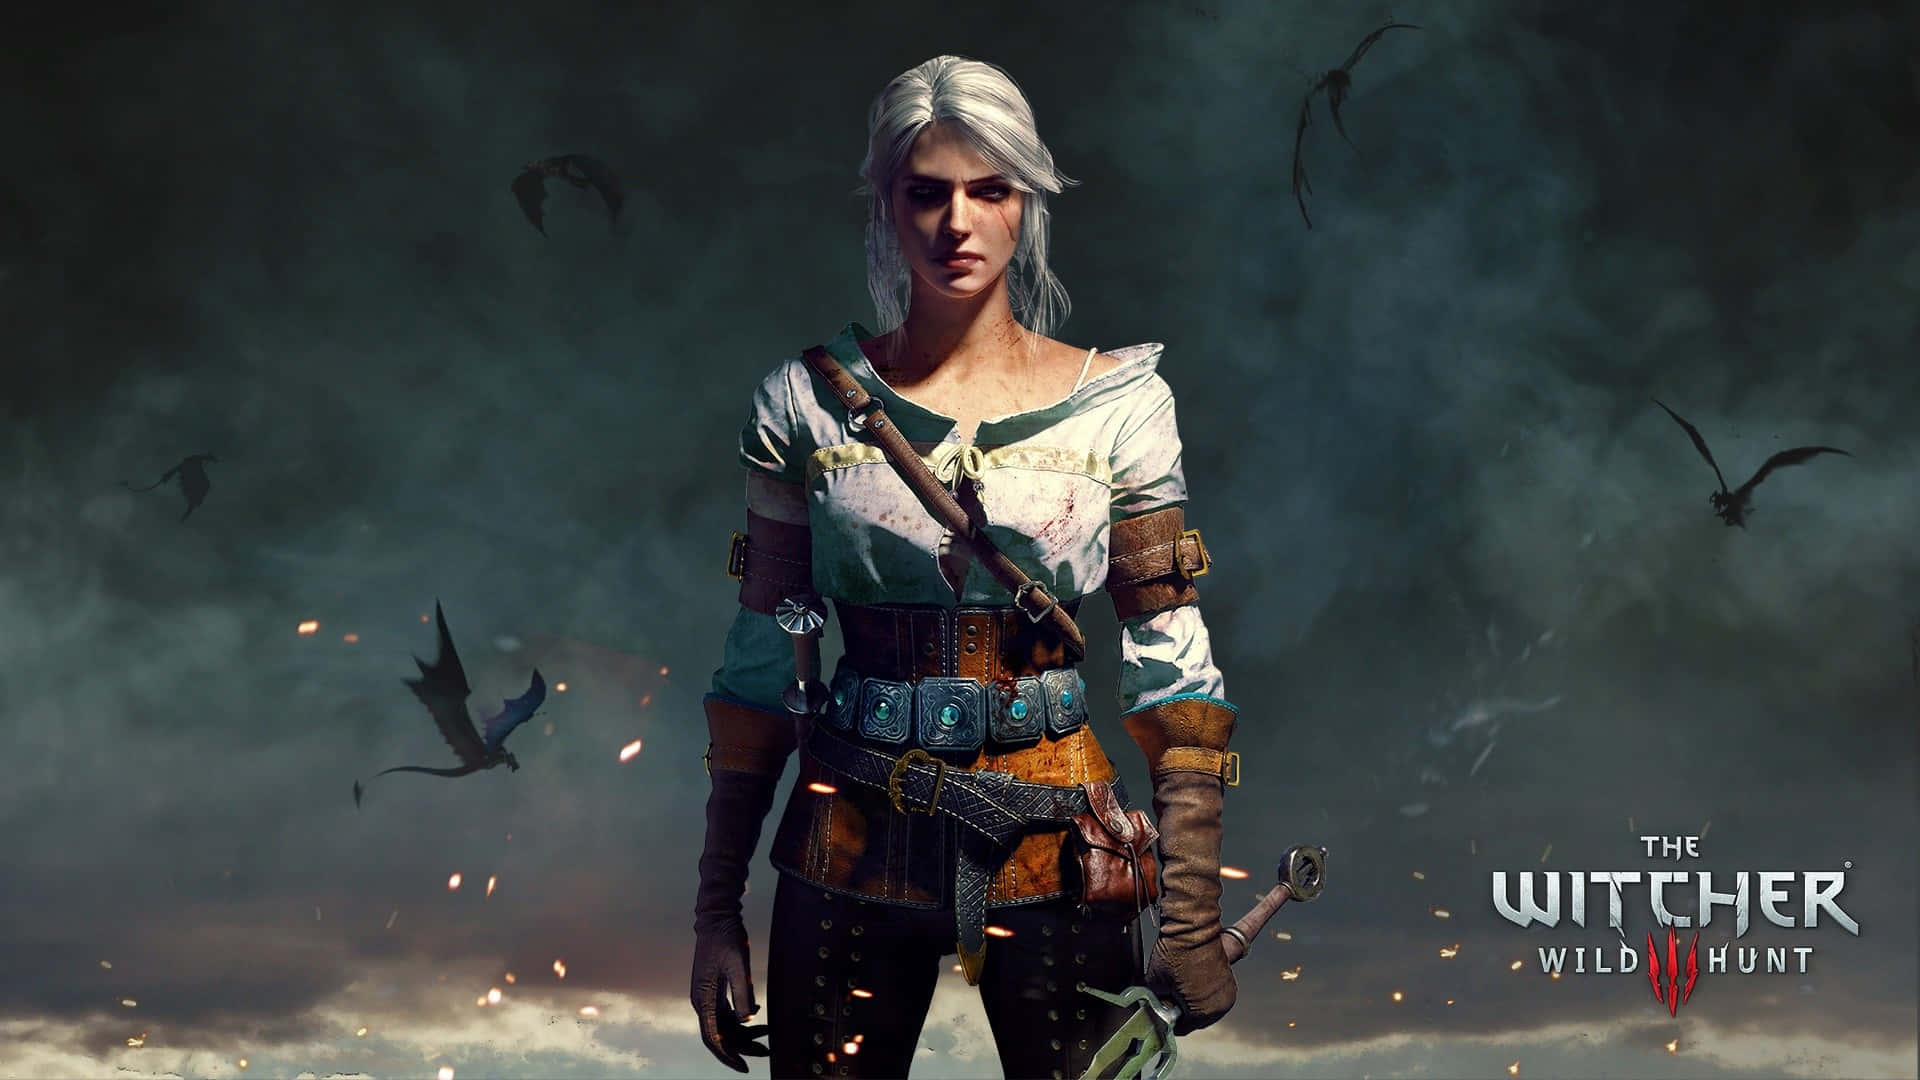 THE WITCHER 3 – WILD HUNT – The N World